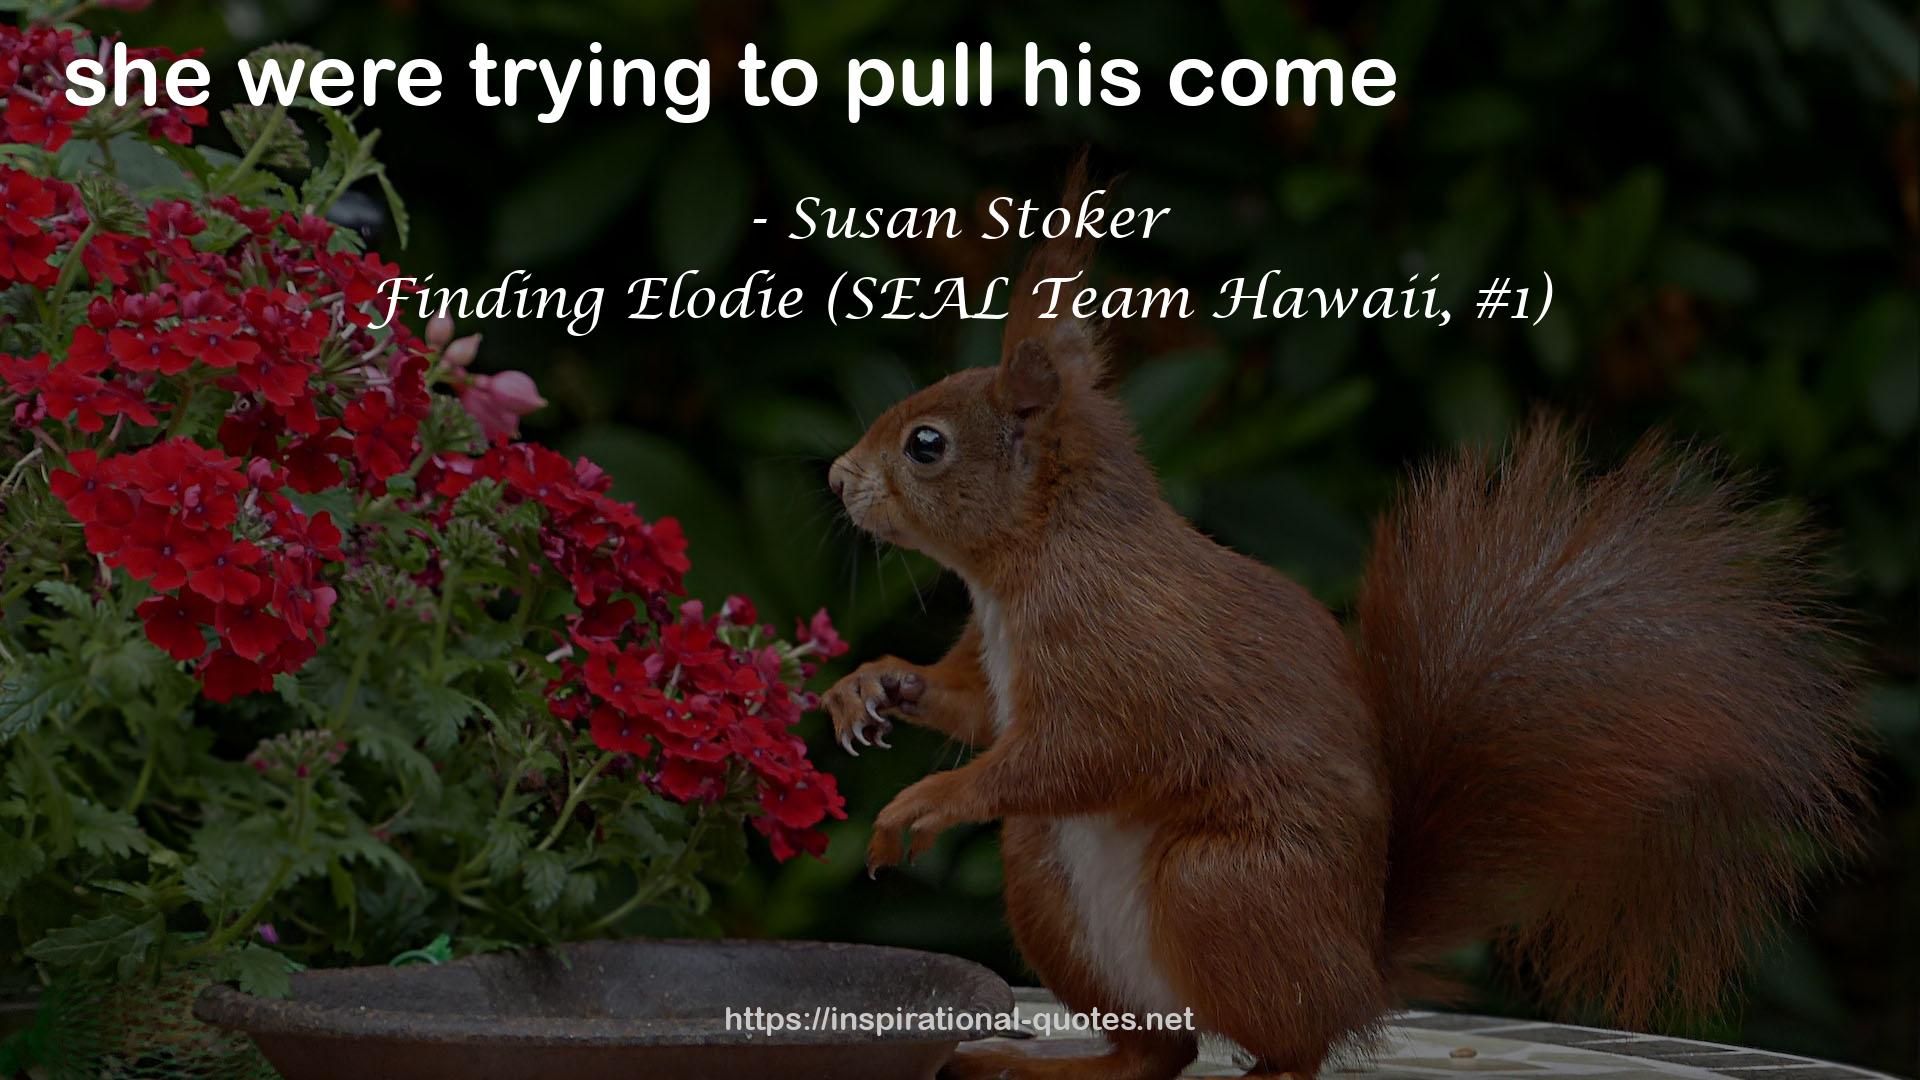 Finding Elodie (SEAL Team Hawaii, #1) QUOTES